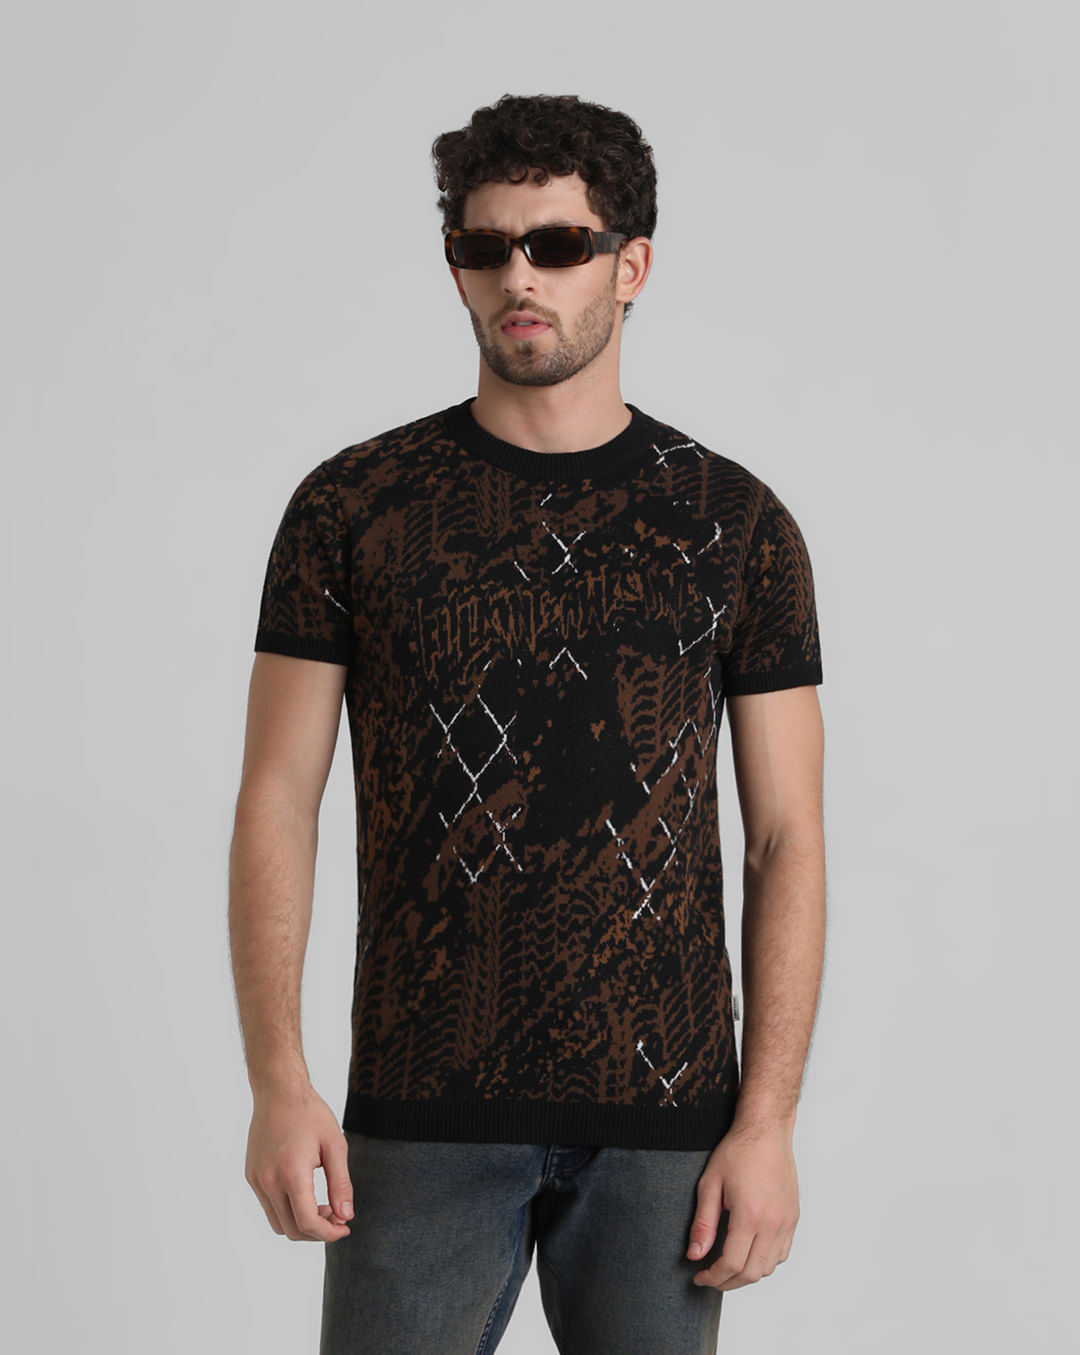 Black Printed Knitted T-shirt